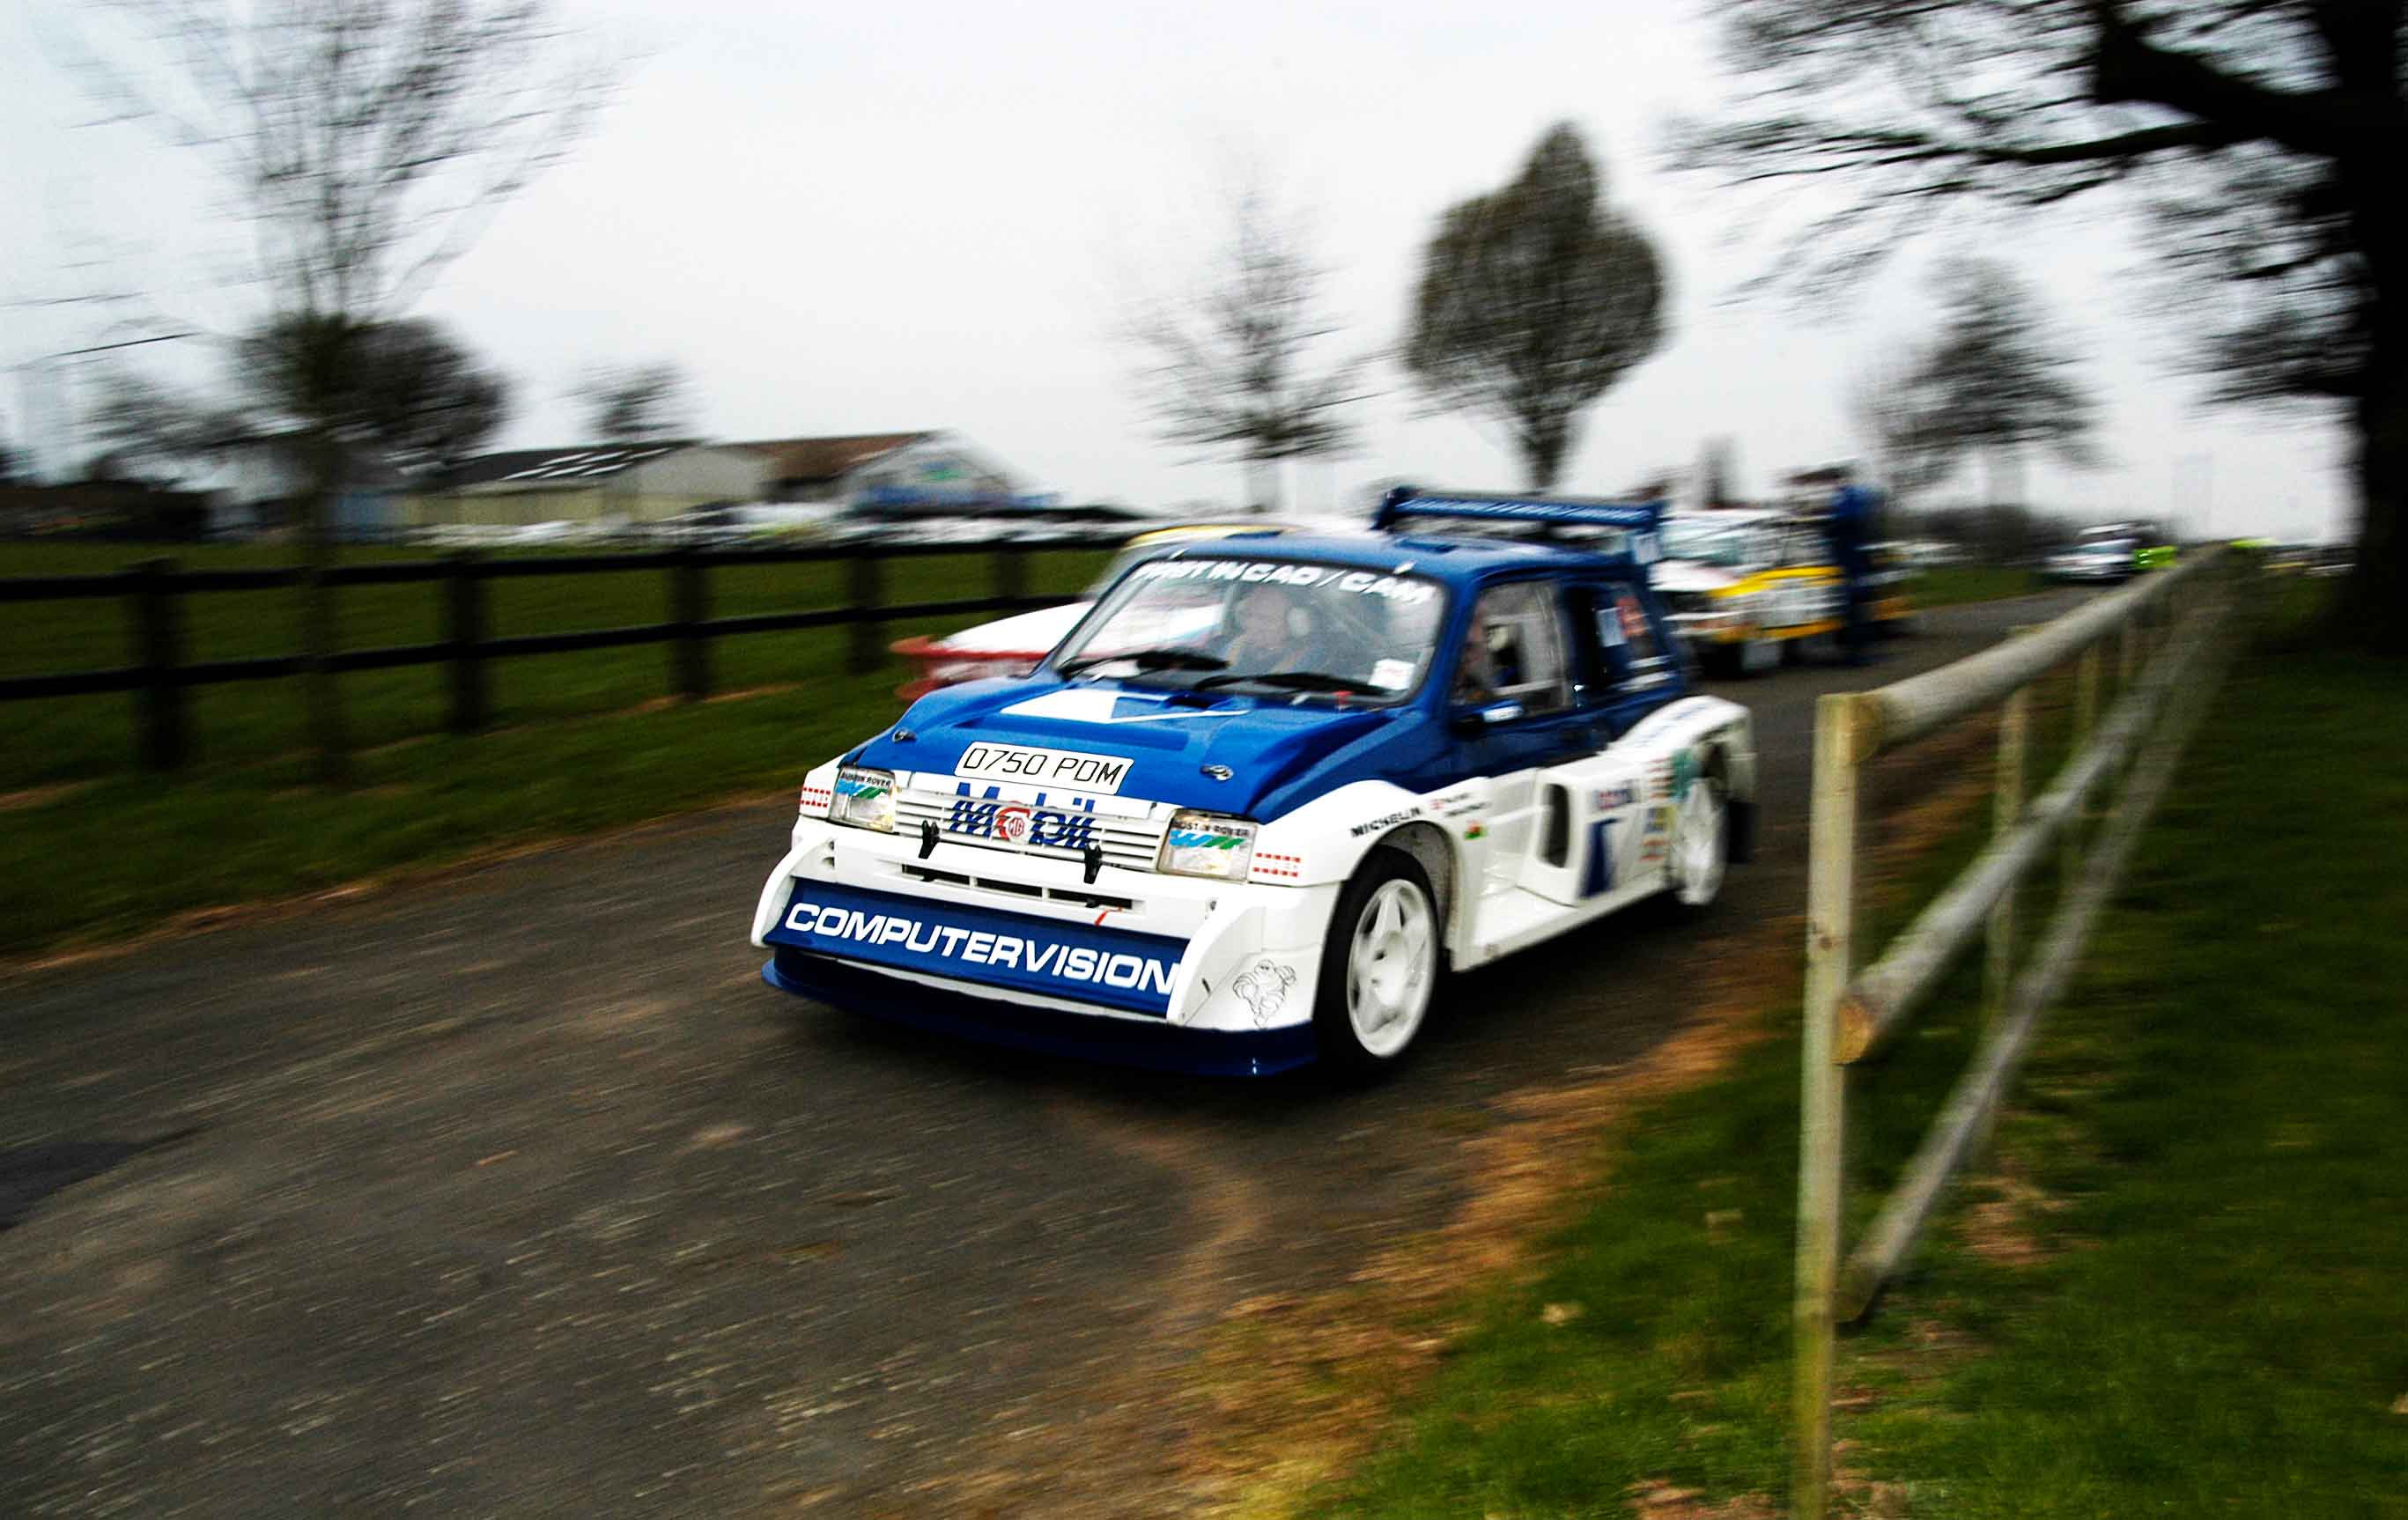 MG Metro 6R4 photo by automotive journalist Andrew Noakes